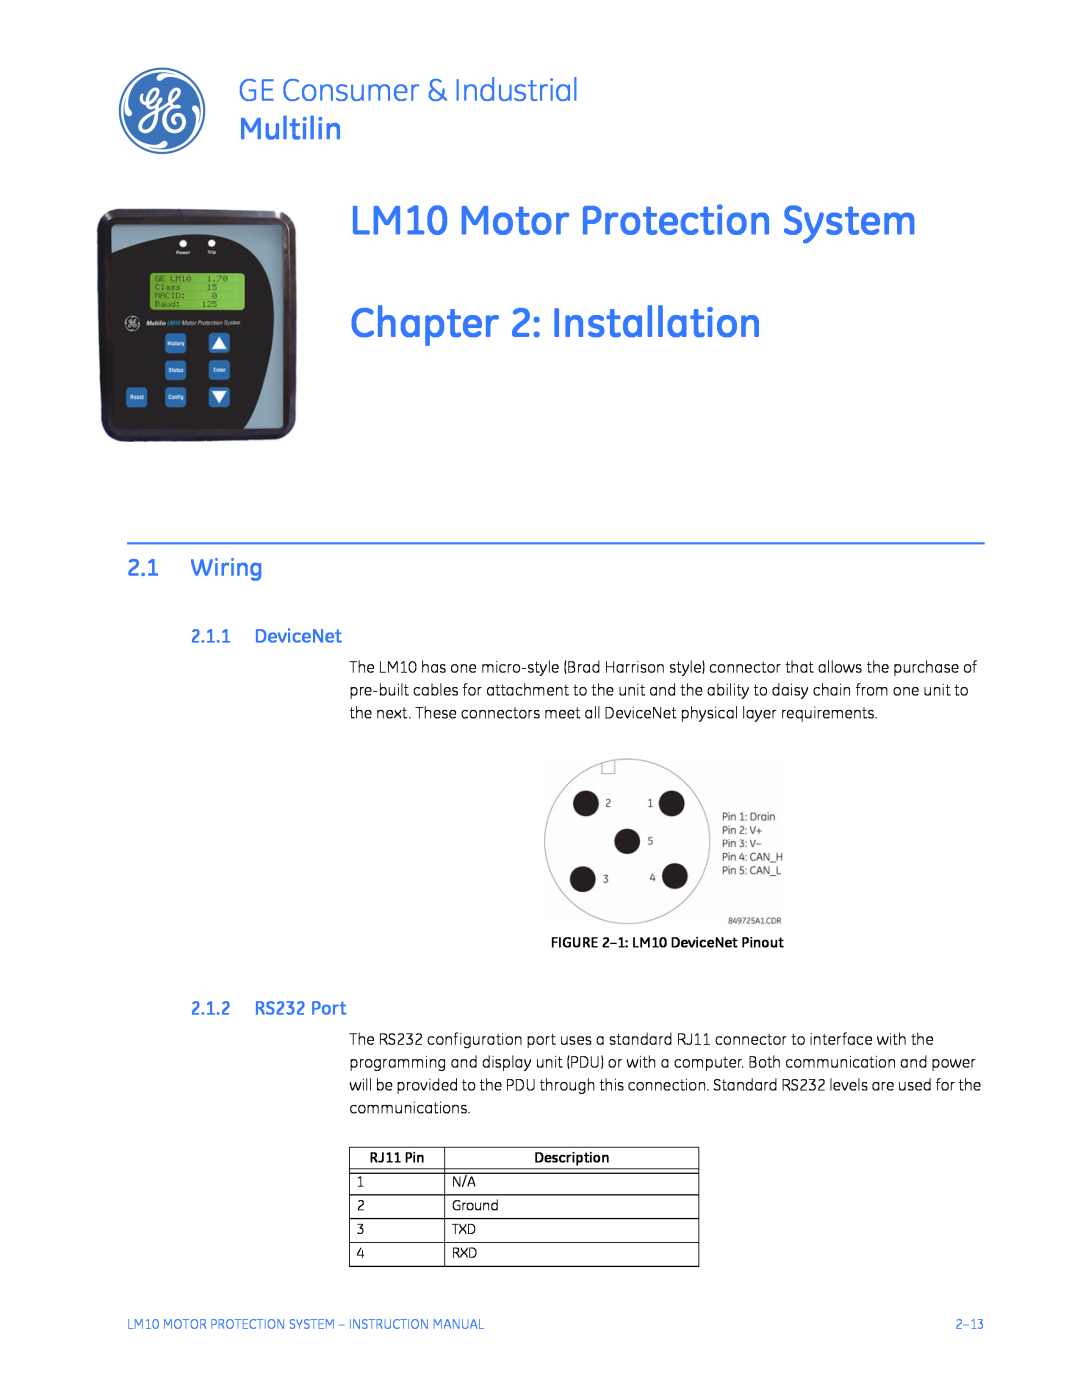 GE LM10 Motor Protection System Installation, Wiring, DeviceNet, 2.1.2 RS232 Port, GE Consumer & Industrial, Multilin 